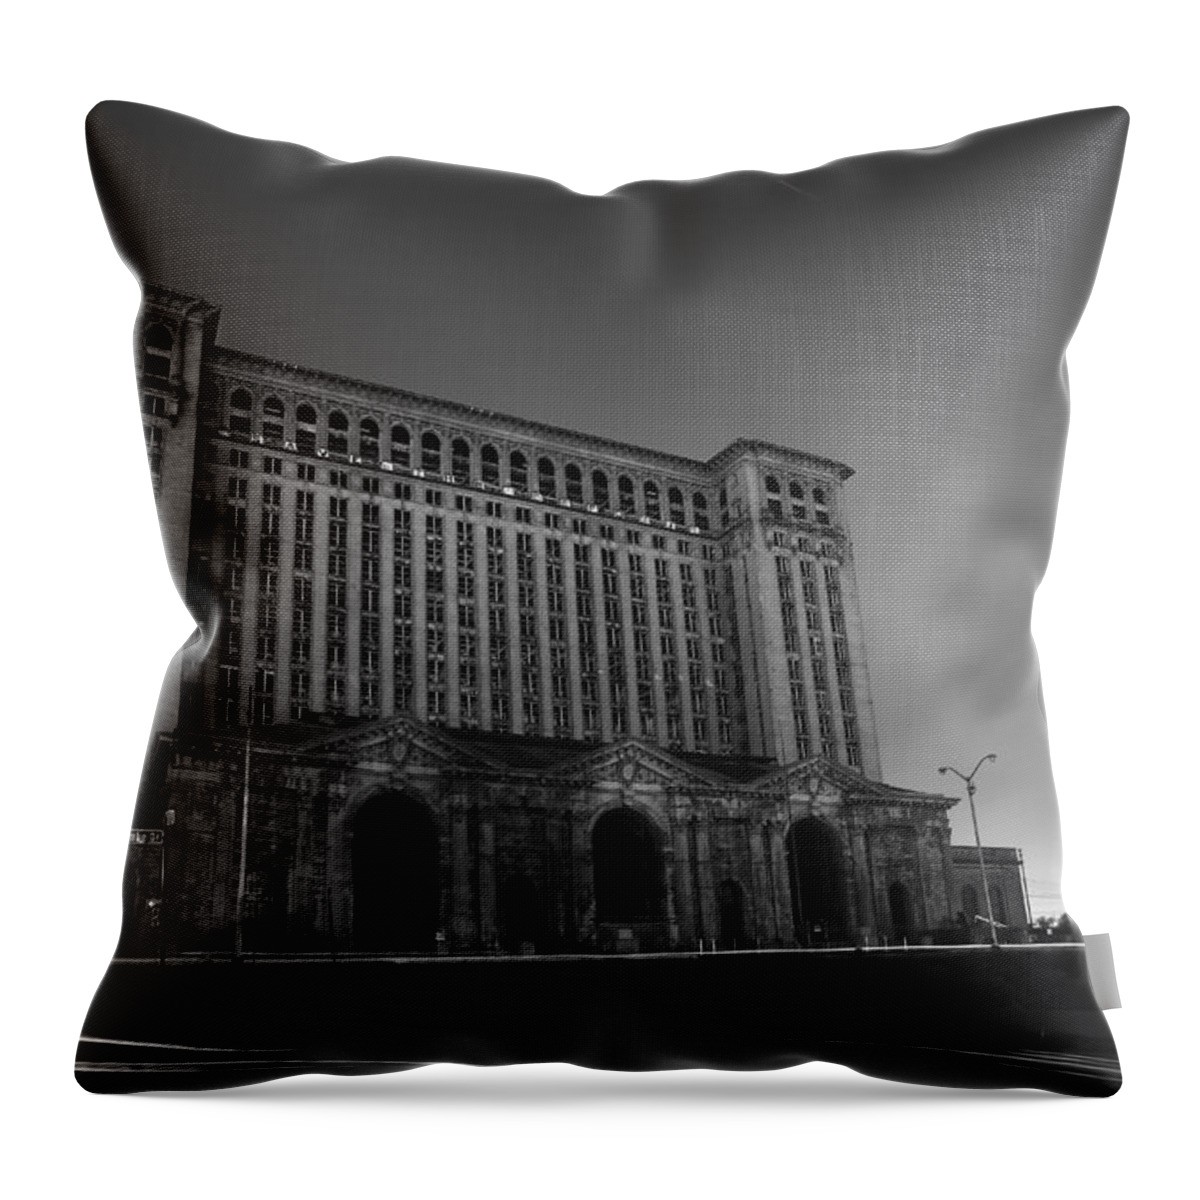 Detroit Throw Pillow featuring the photograph Michigan Central Station At Midnight by Gordon Dean II